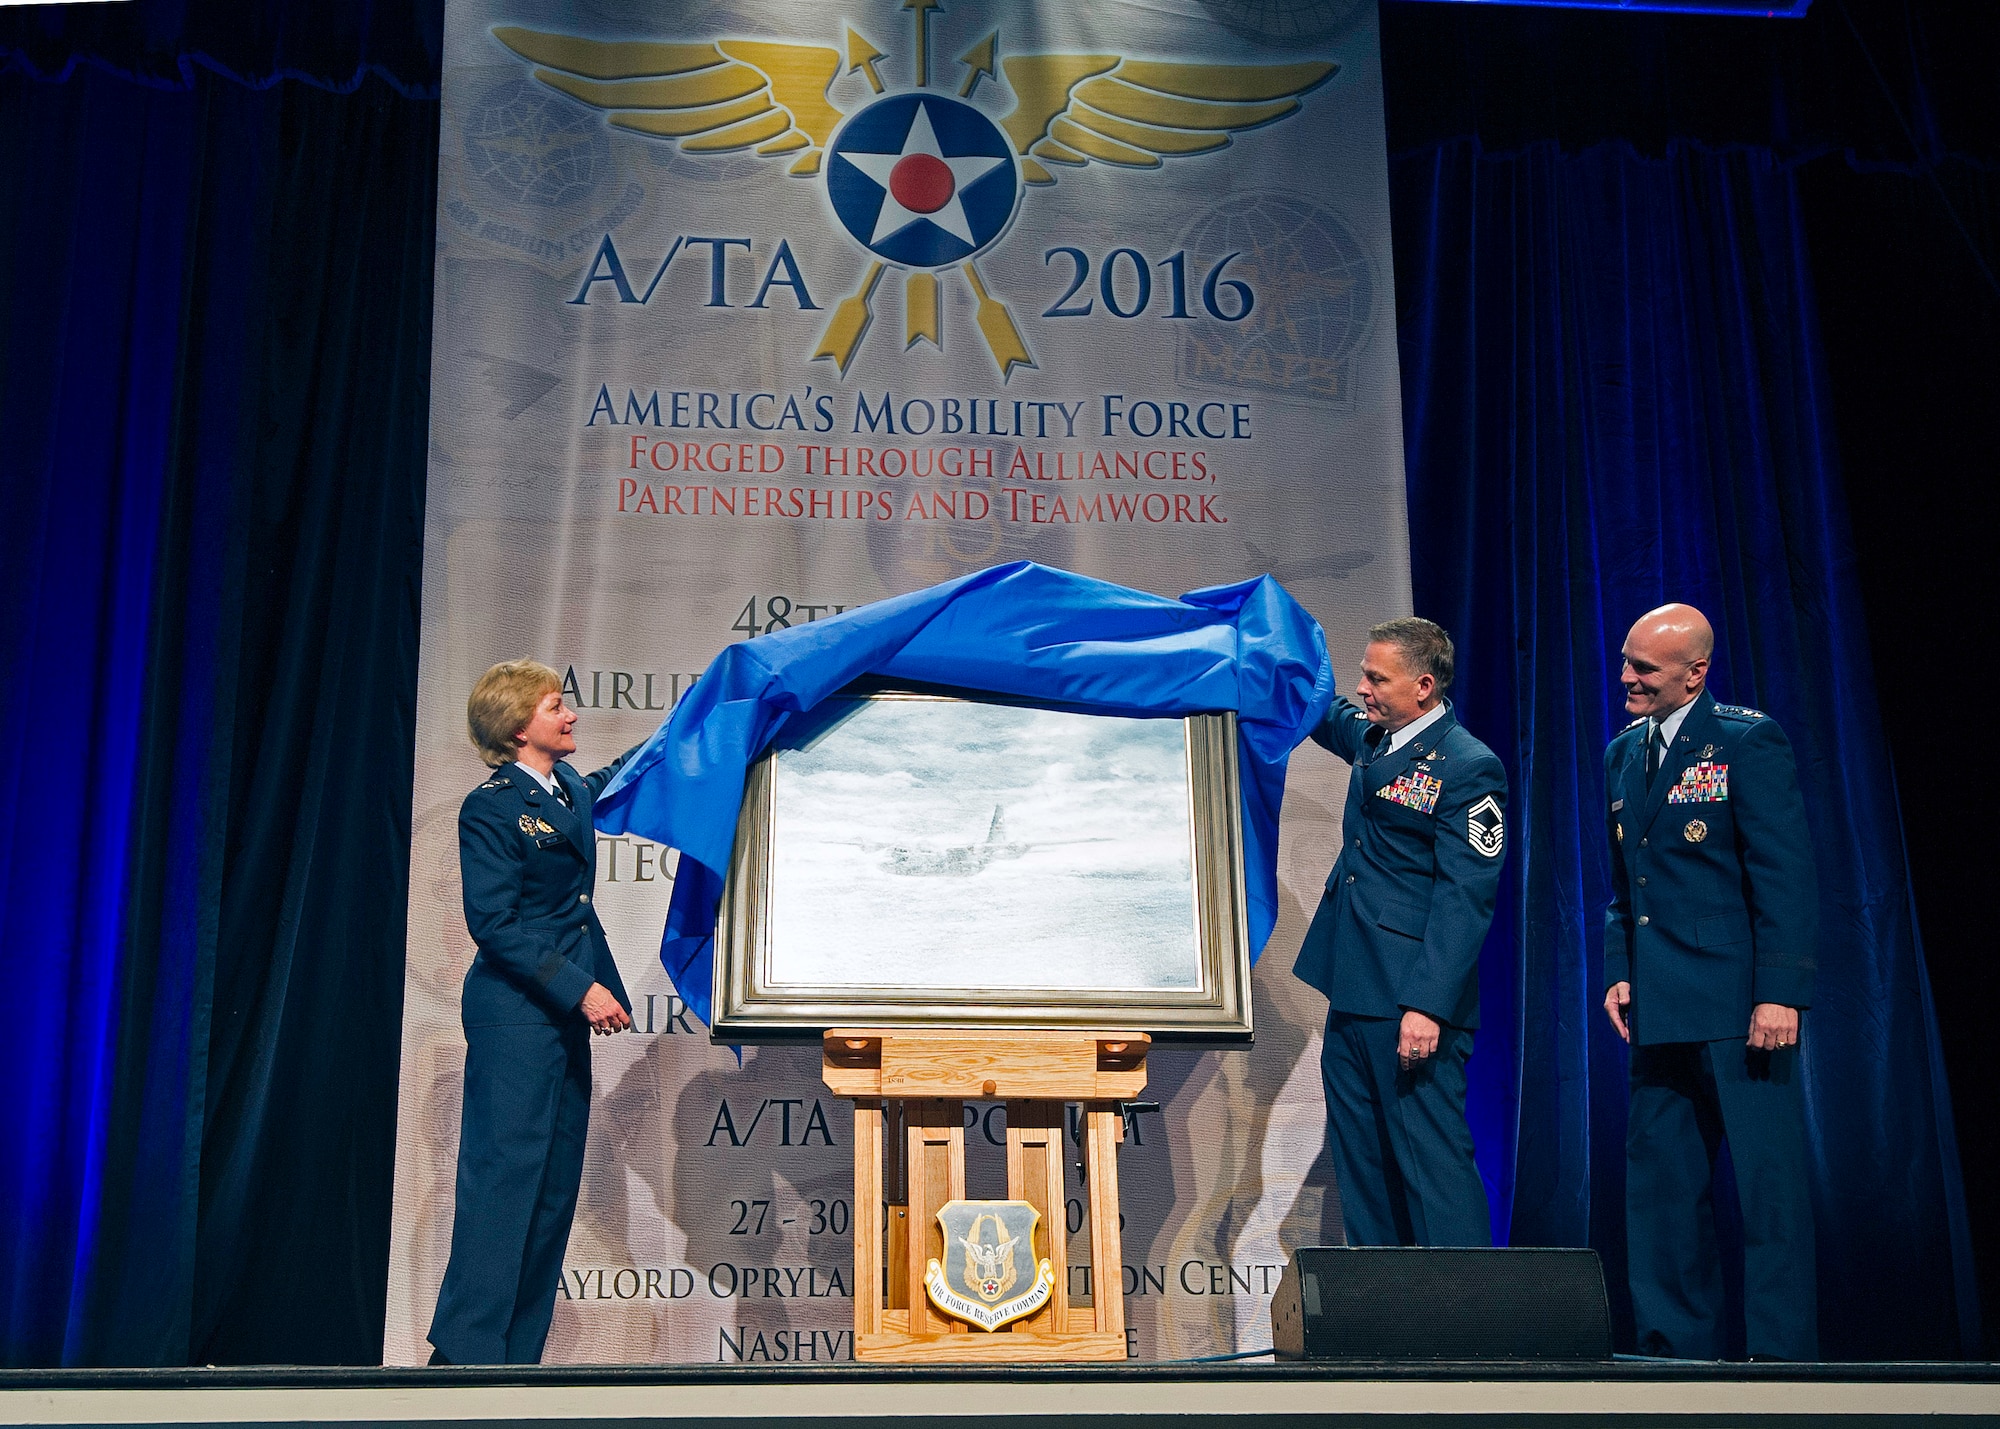 Lt. Gen. Maryanne Miller, chief of the Air Force Reserve, Senior Master Sgt. Darby Perrin, and Gen. Carlton D. Everhart III, Air Mobility Command commander, unveil the painting "Deepwater Horizon" at the 48th annual Air Mobility Command and Airlift/Tanker Association Symposium in Nashville, Tennessee. The painting, created by Perrin, is the newest addition to the Air Force Art Program depicts two C-130H Hercules Modular Aerial Spray Systems and Citizen Airmen from the 910th Airlift Wing, Youngstown Air Reserve Station, Ohio, in the cleanup effort following the 2010 BP Deepwater Horizon oil spill. The painting will join nearly 9,000 other works in the Air Force Art Program. These works document the history of Air Force Airmen, equipment, locations and activities. While the 910th AW's aerial sprays are commonly known for insect and vegetation control, the wing has assisted the U.S. Coast Guard with oil spill cleanup for almost 20 years. The cleanup mission lasted five weeks and AF Reserve aircrews sprayed approximately 30,000 acres with oil dispersant during the cleanup effort. (U.S. Air Force photo by Matthew A. Ebarb)